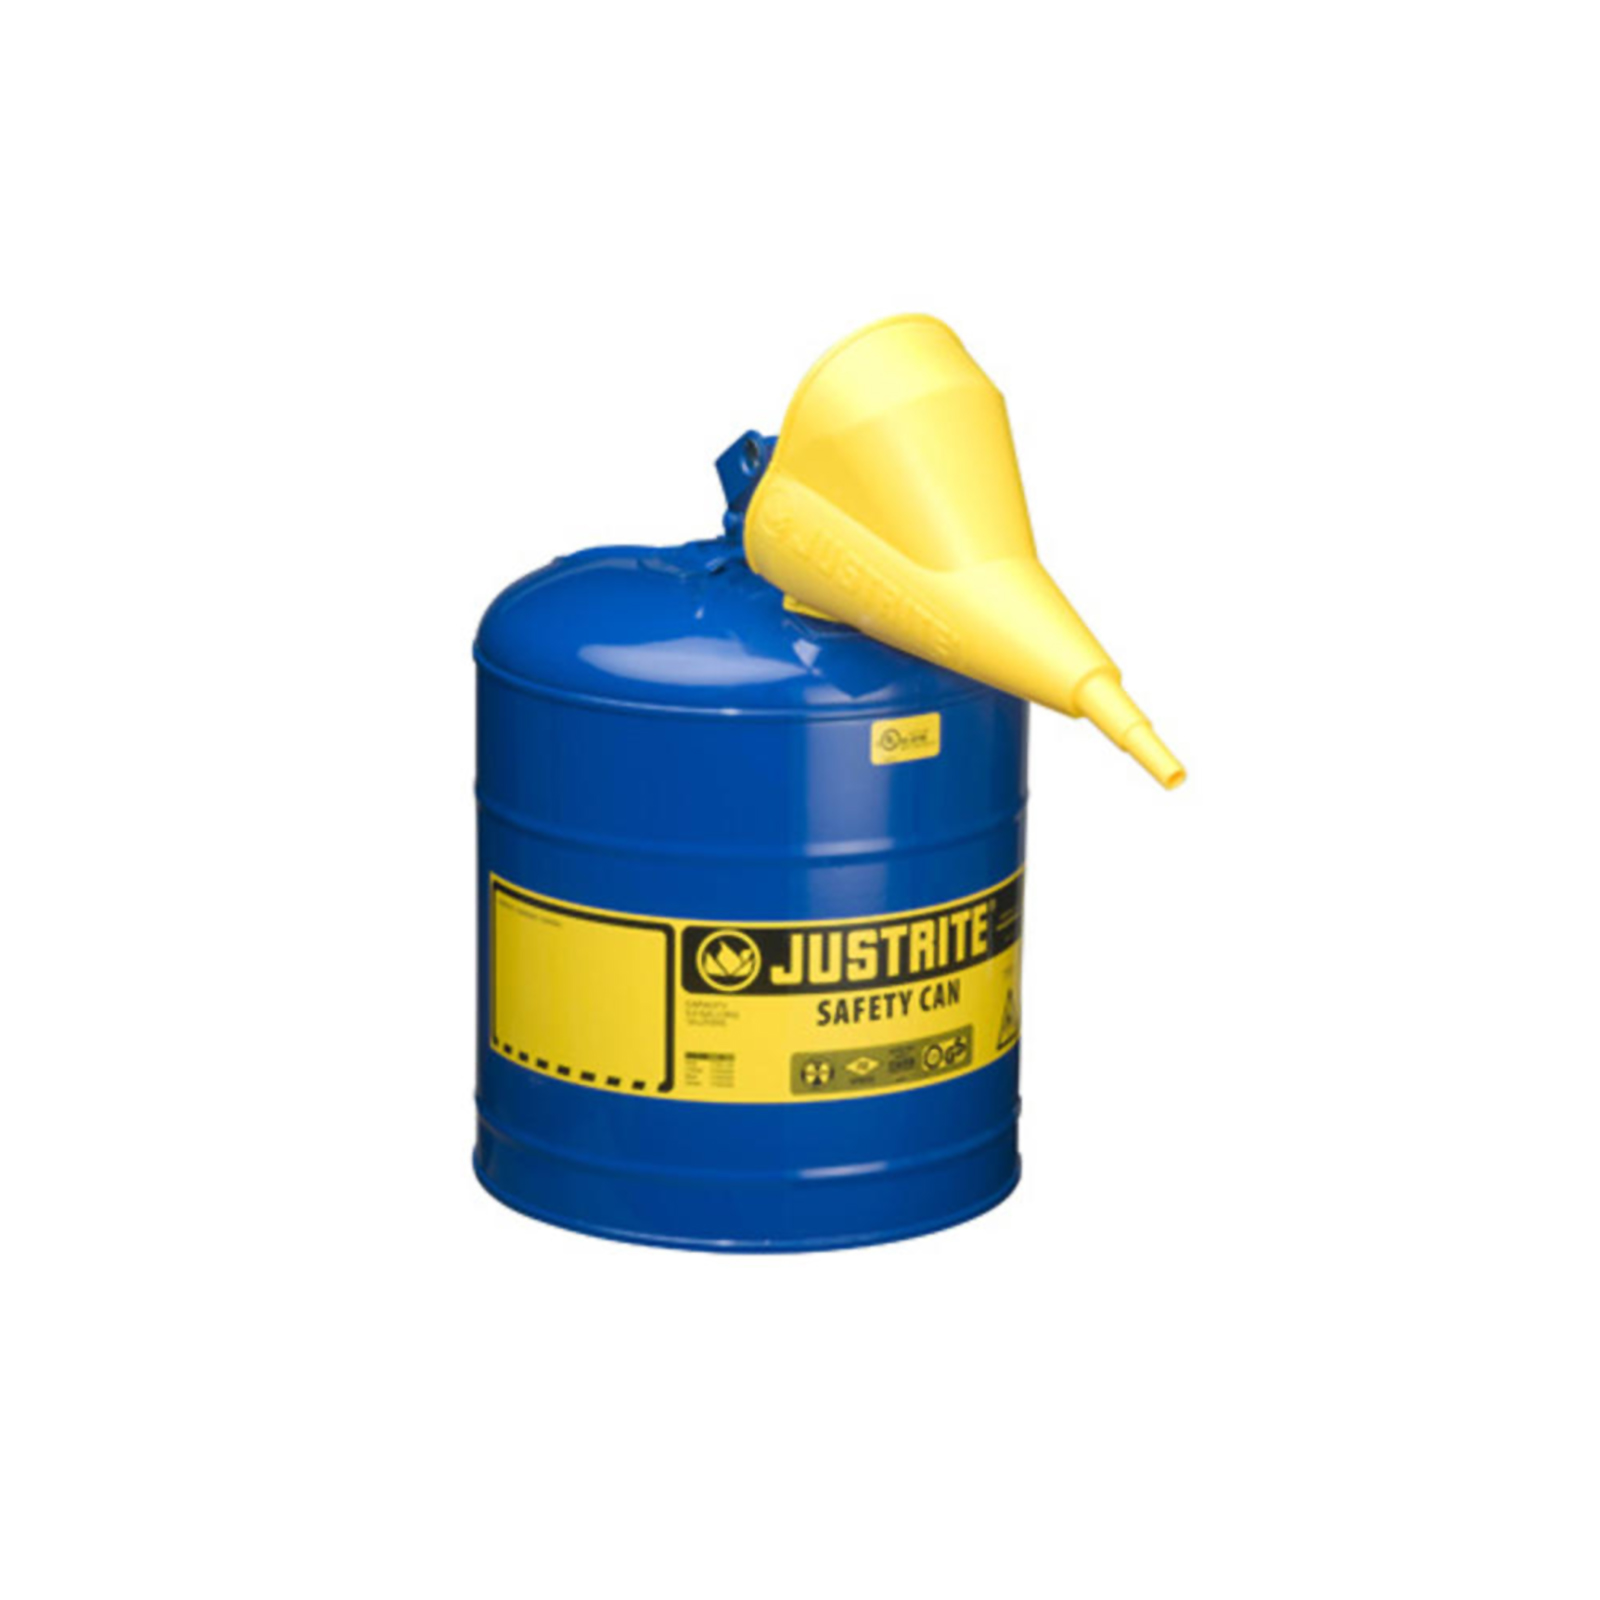 Justrite Mfg 5G Safety Can with Funnel - Blue